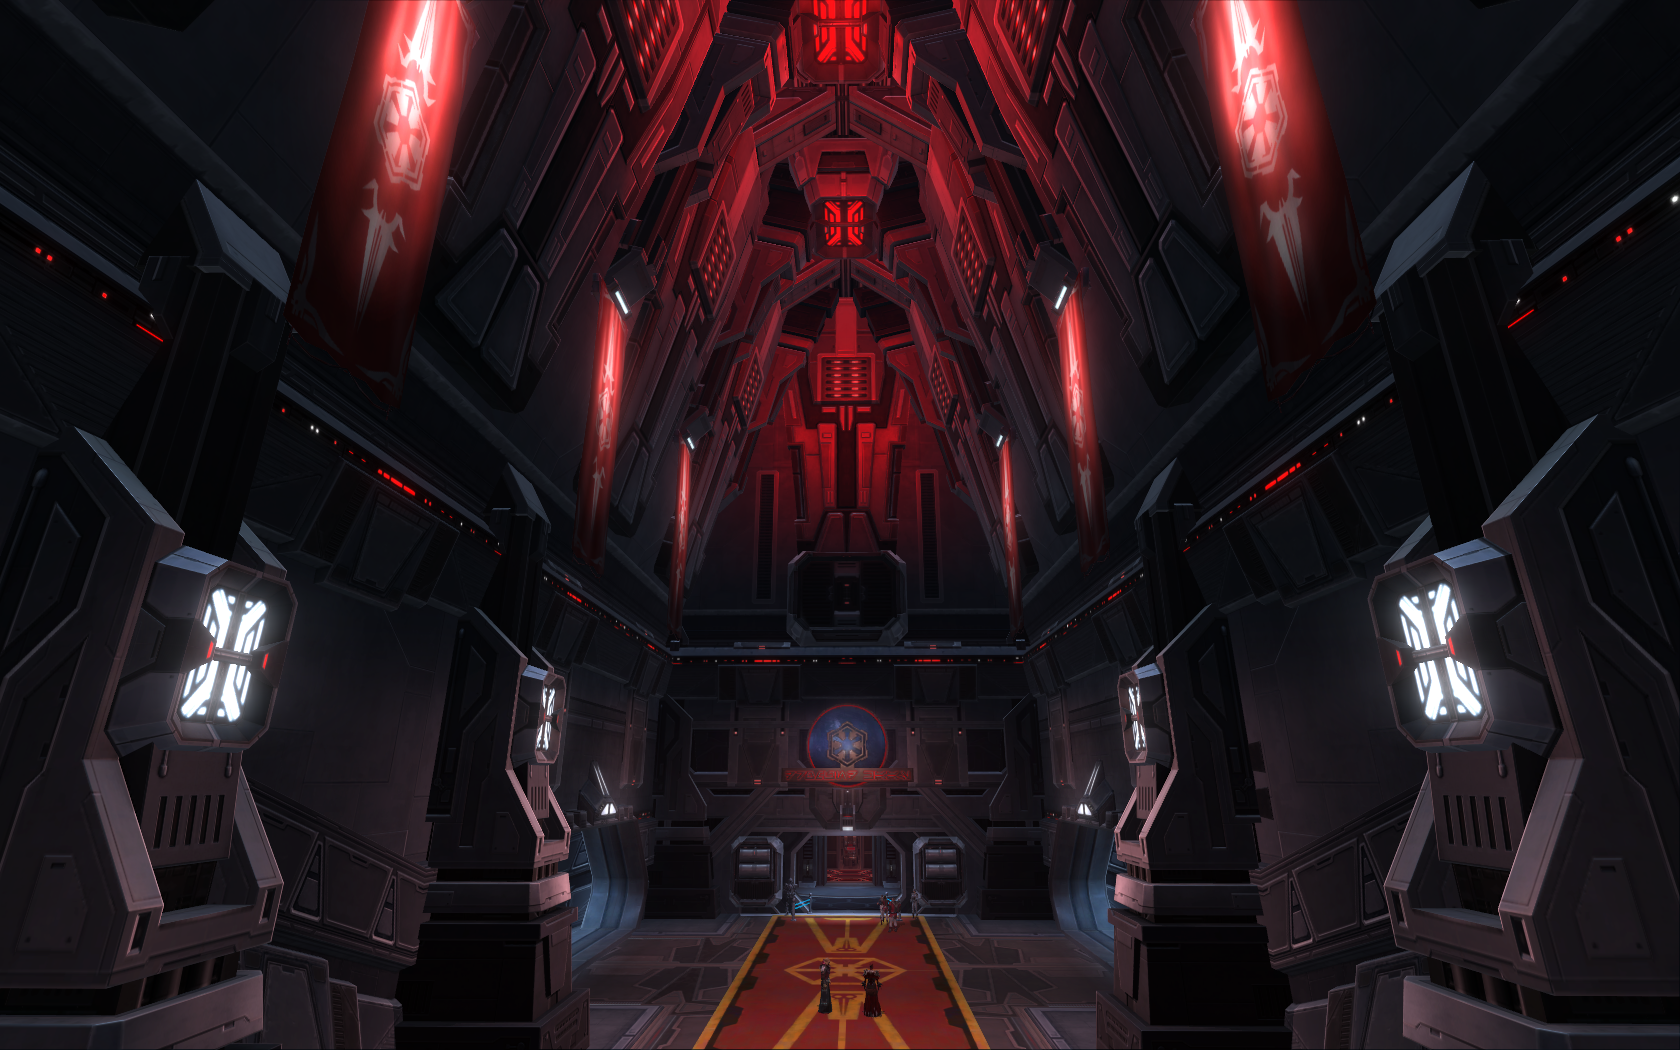 Star Wars Sith Wallpaper Widescreen For Free Wallpaper Costumes Galaxy's Edge